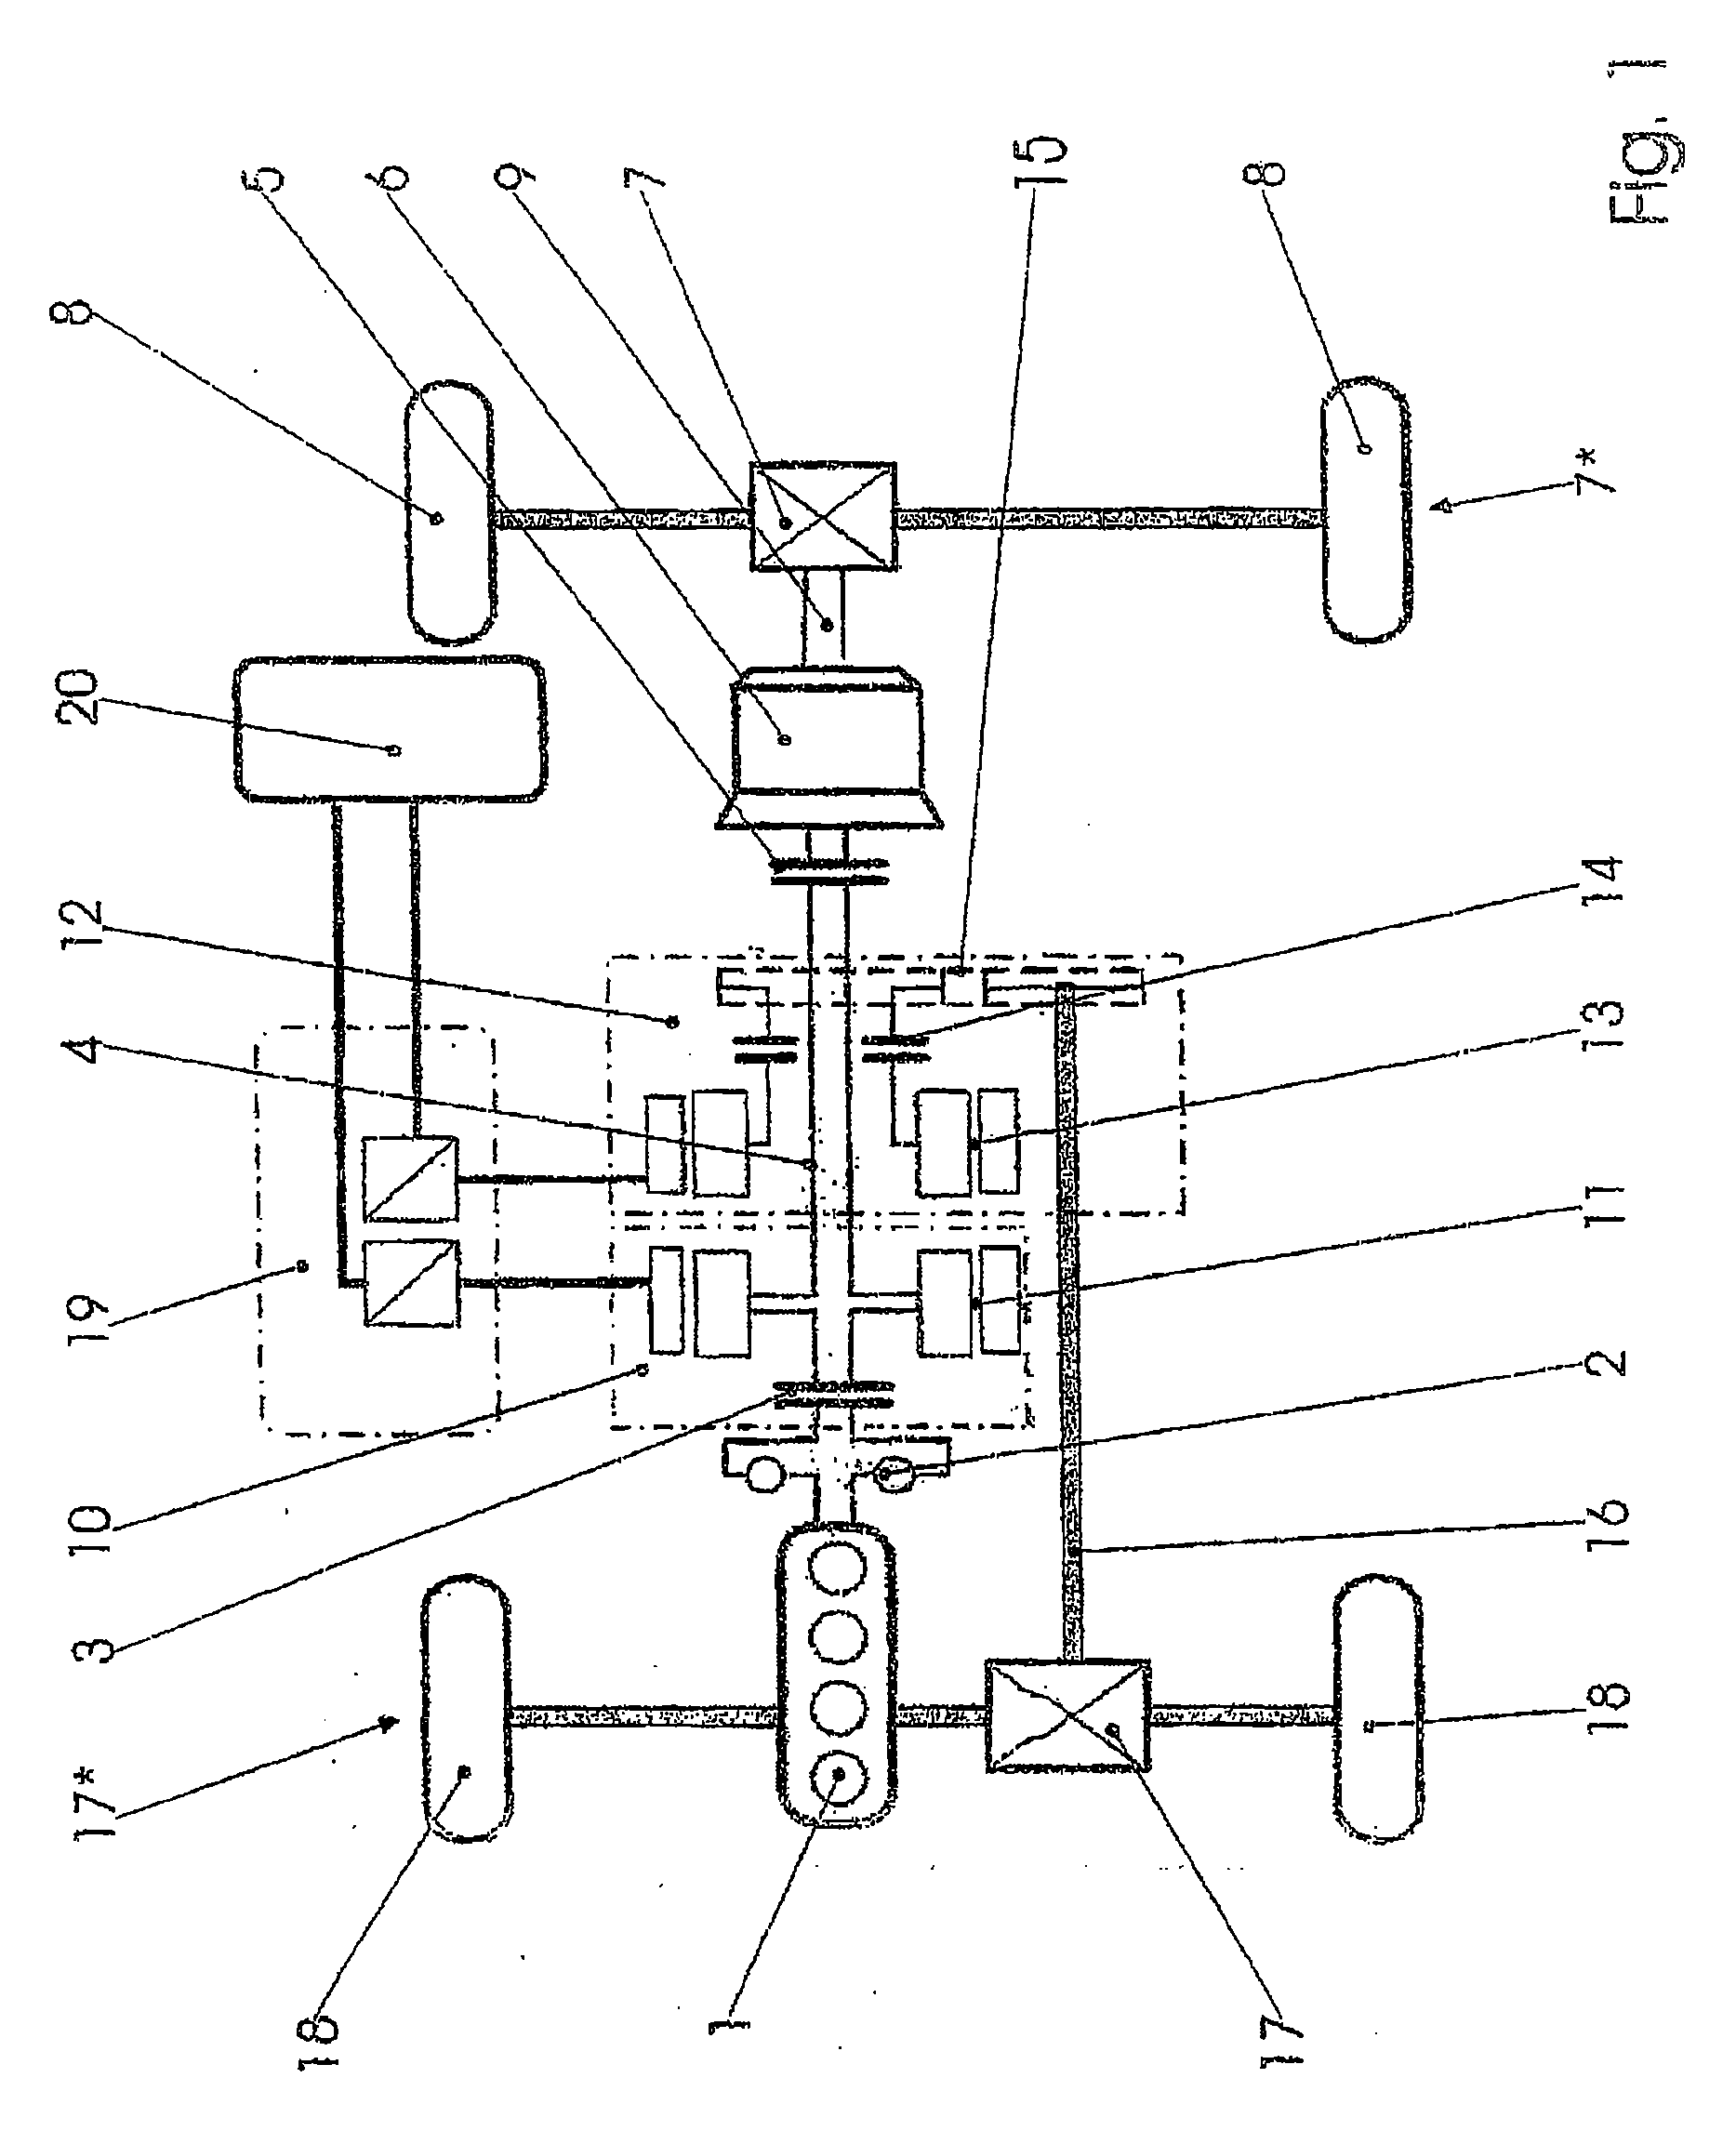 Drive unit for motor vehicles with hybrid drive in a longitudinal arrangement